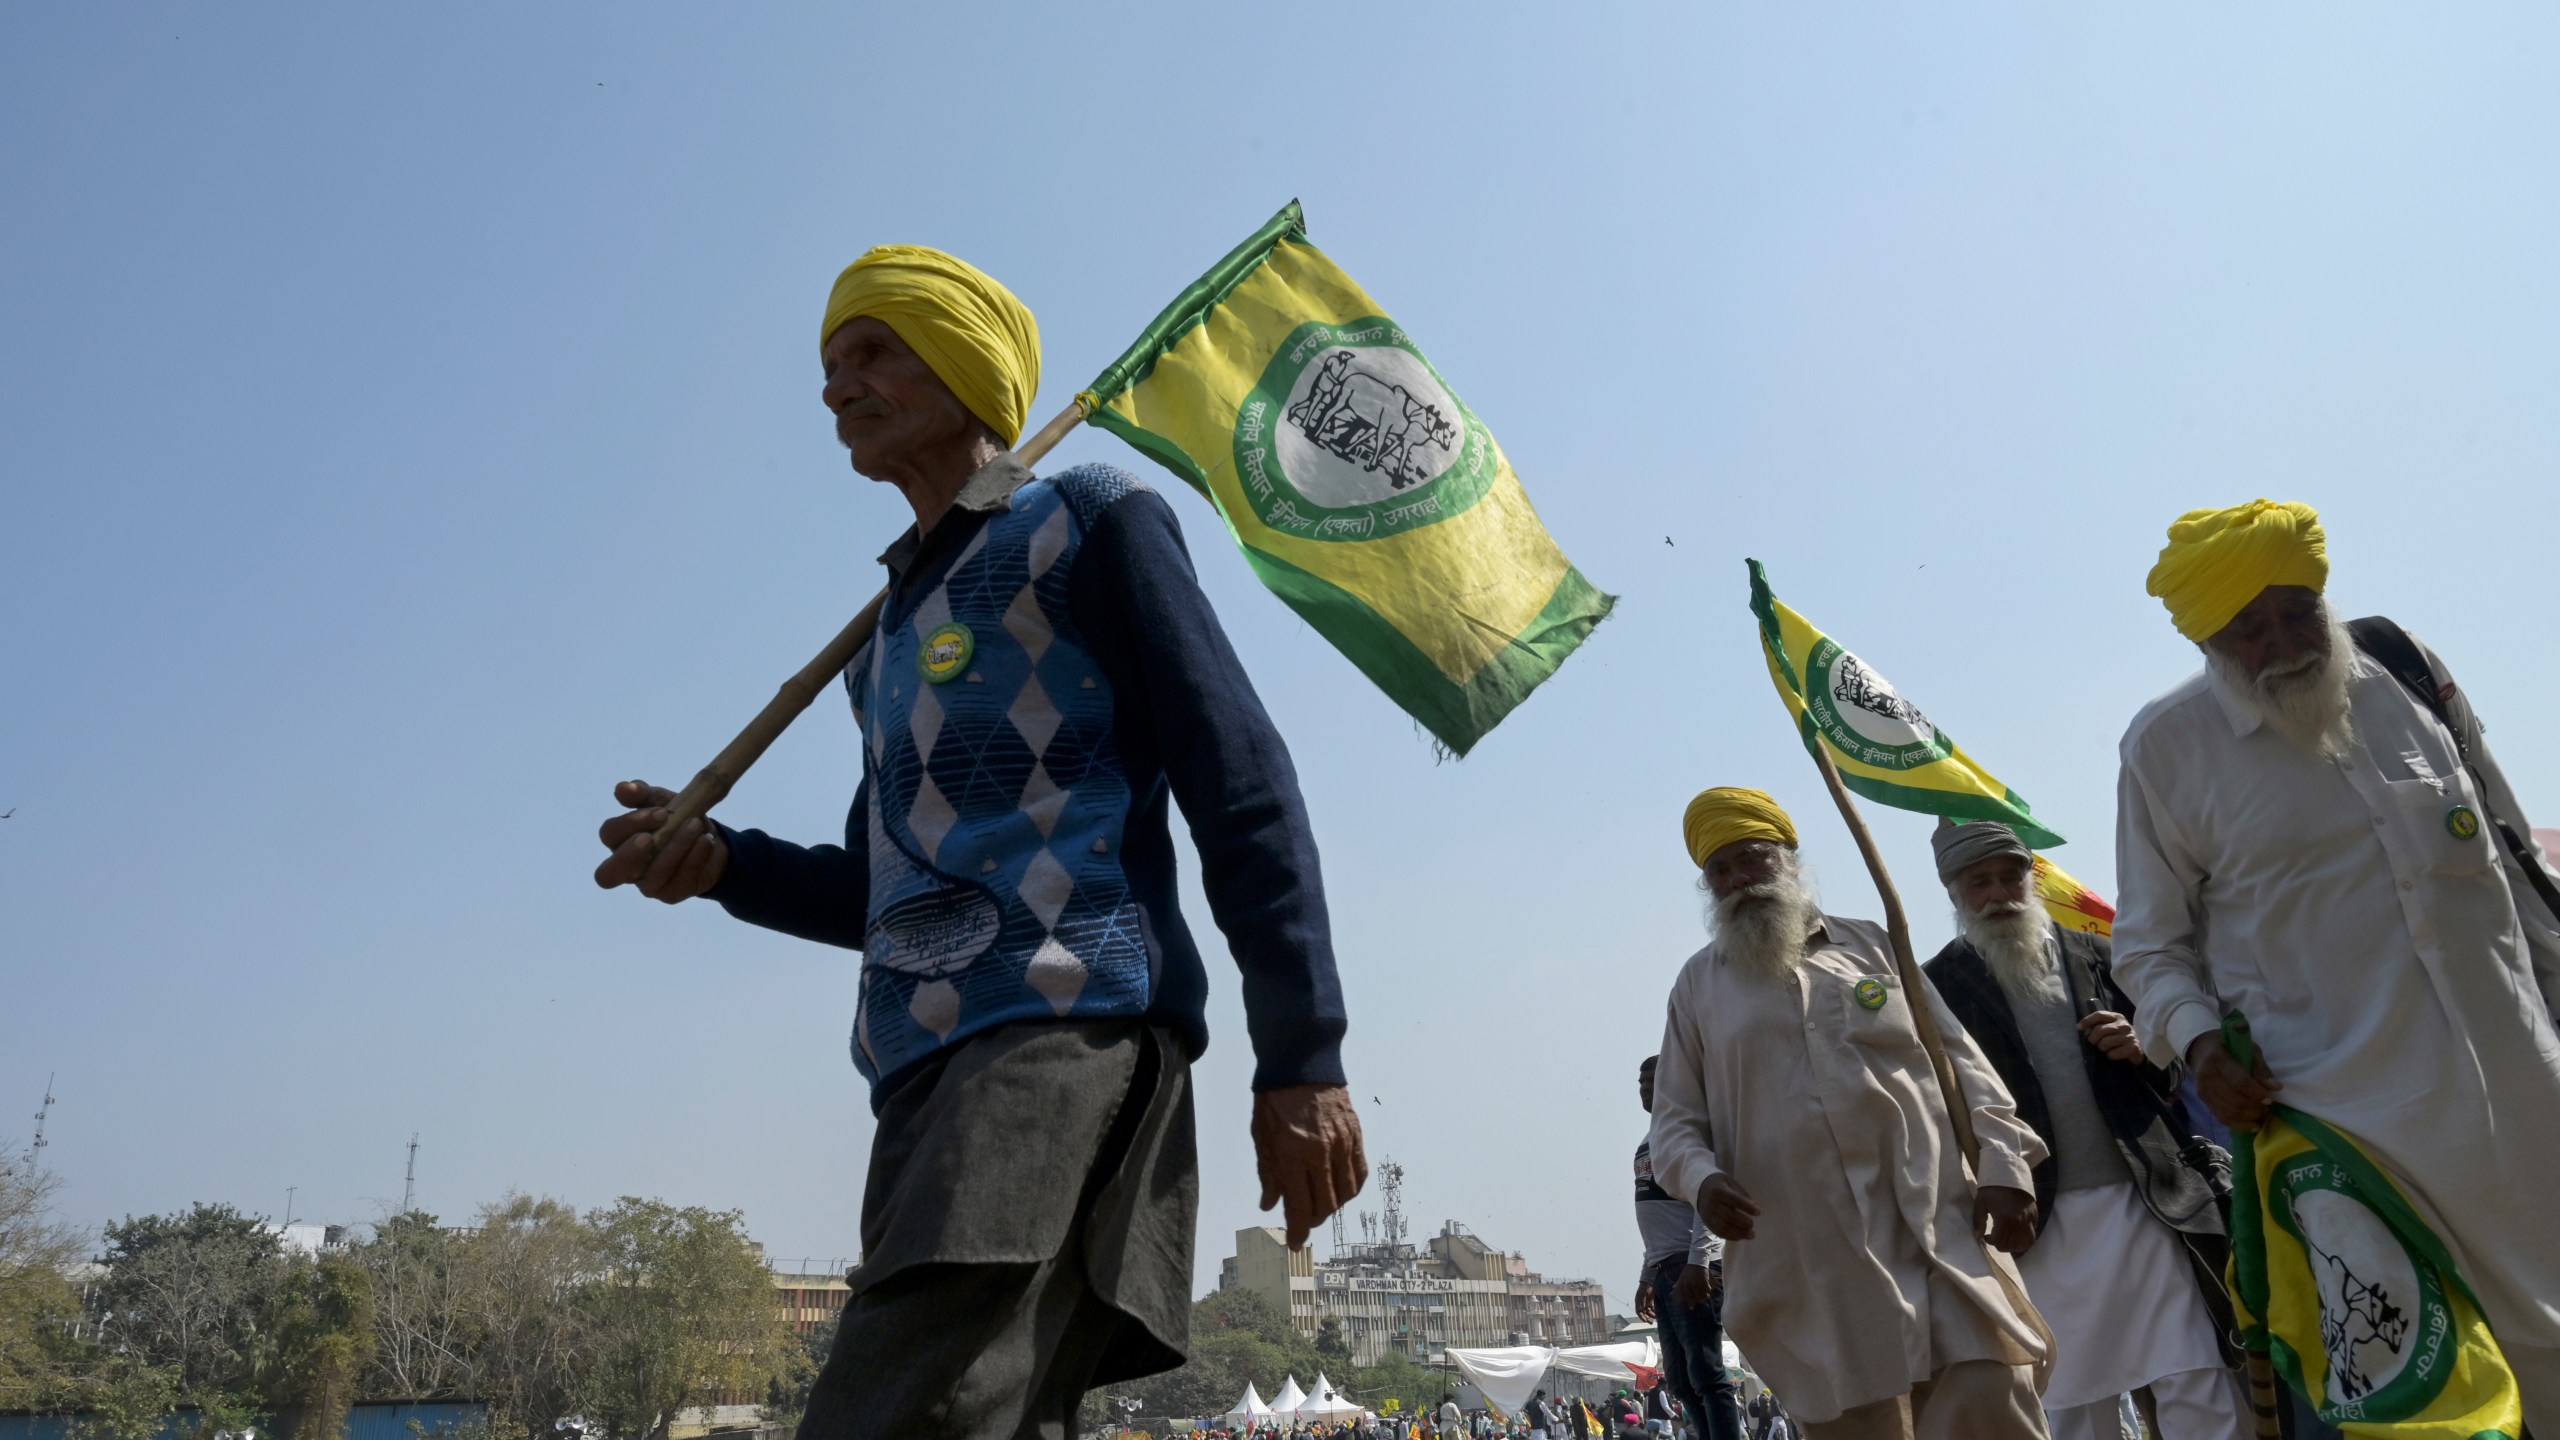 Indian farmers who have been protesting to demand guaranteed crop prices gather at Ramlila ground in New Delhi, India, Thursday, March 14, 2024. (AP Photo)